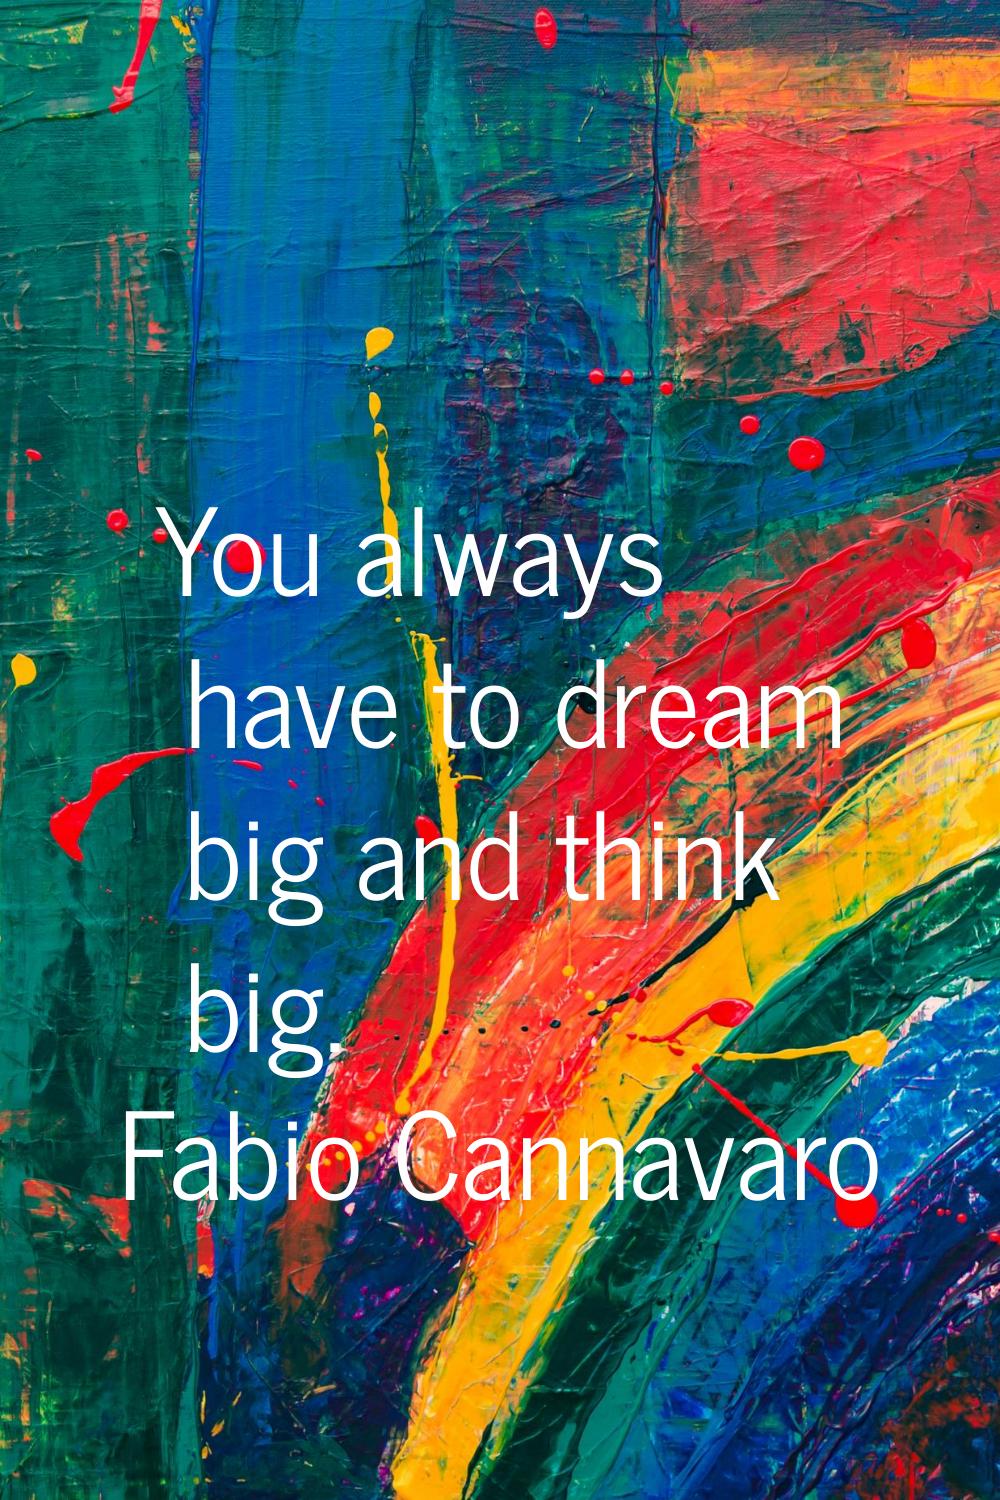 You always have to dream big and think big.